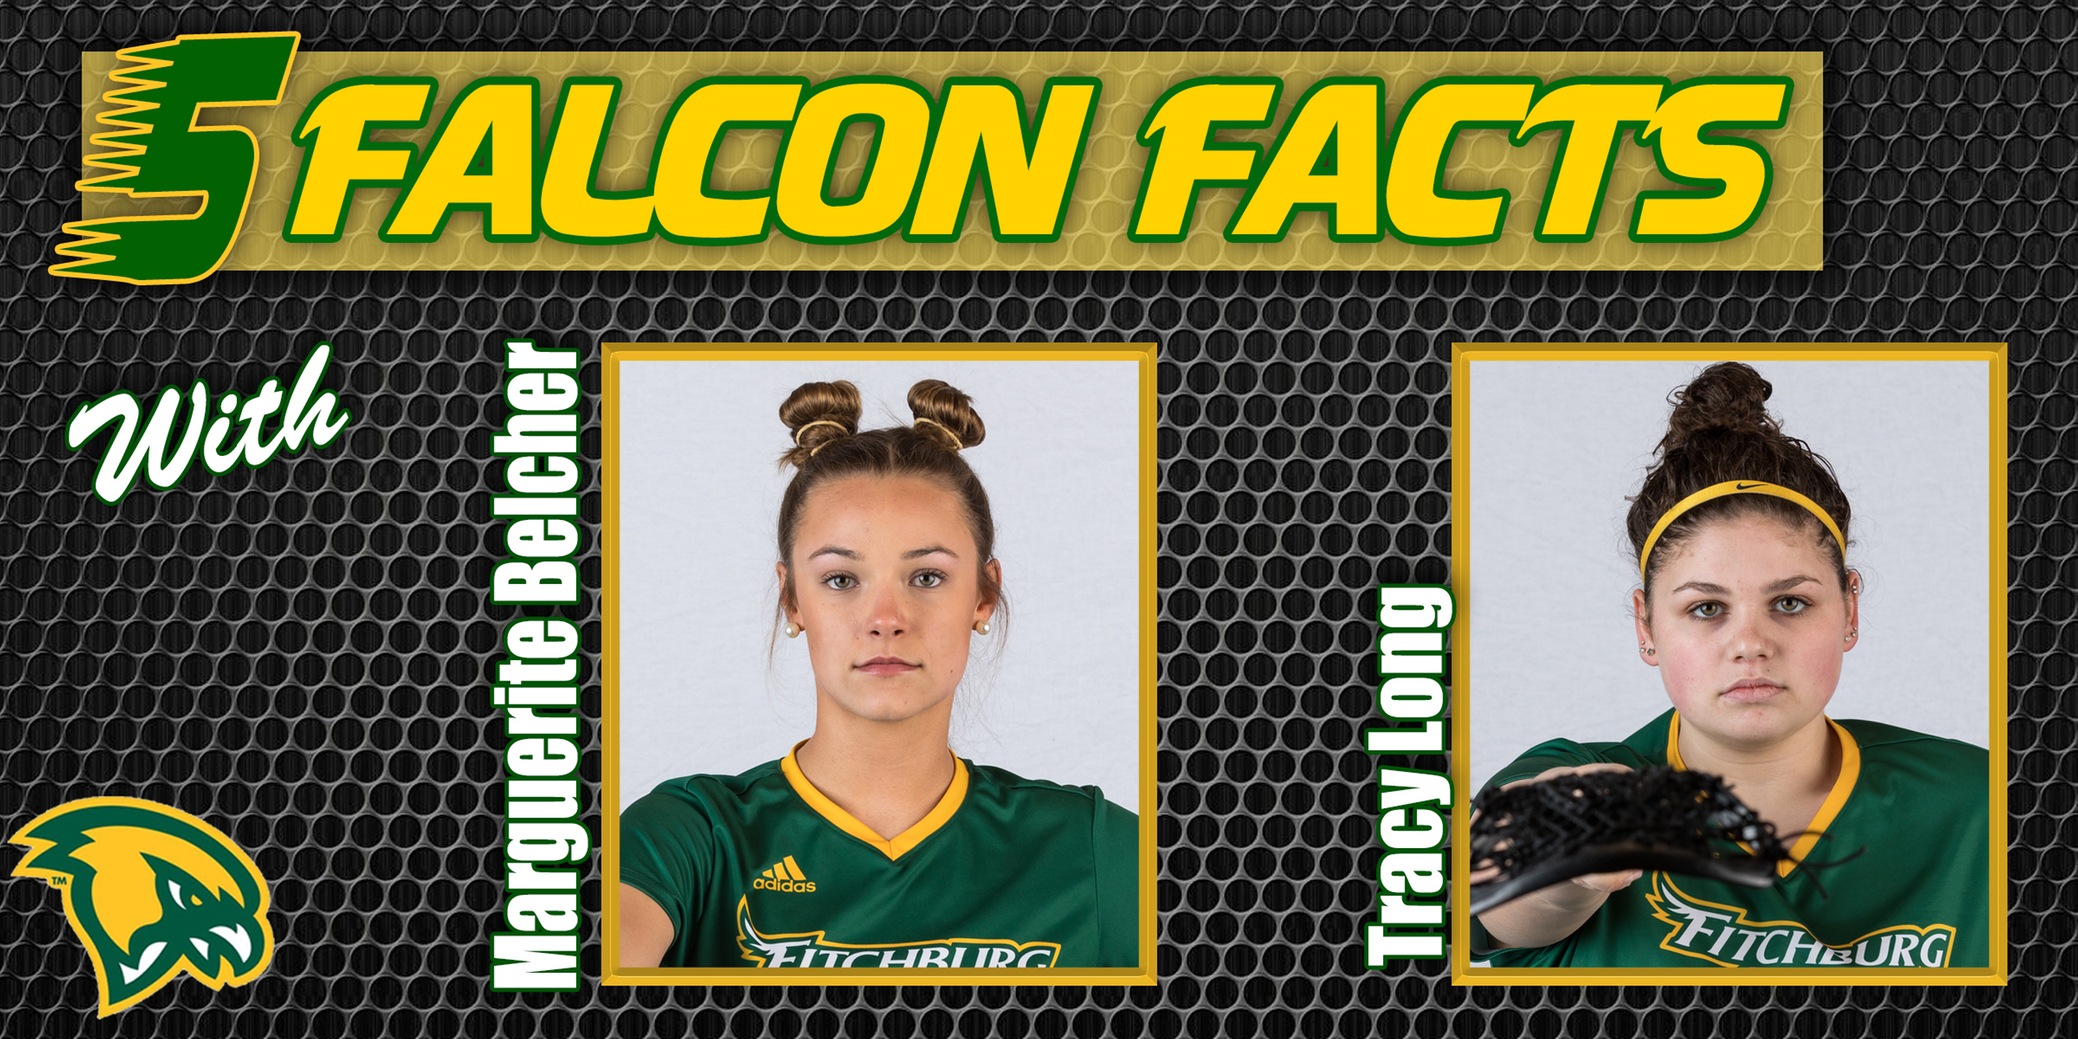 Five Falcon Facts with Belcher & Long